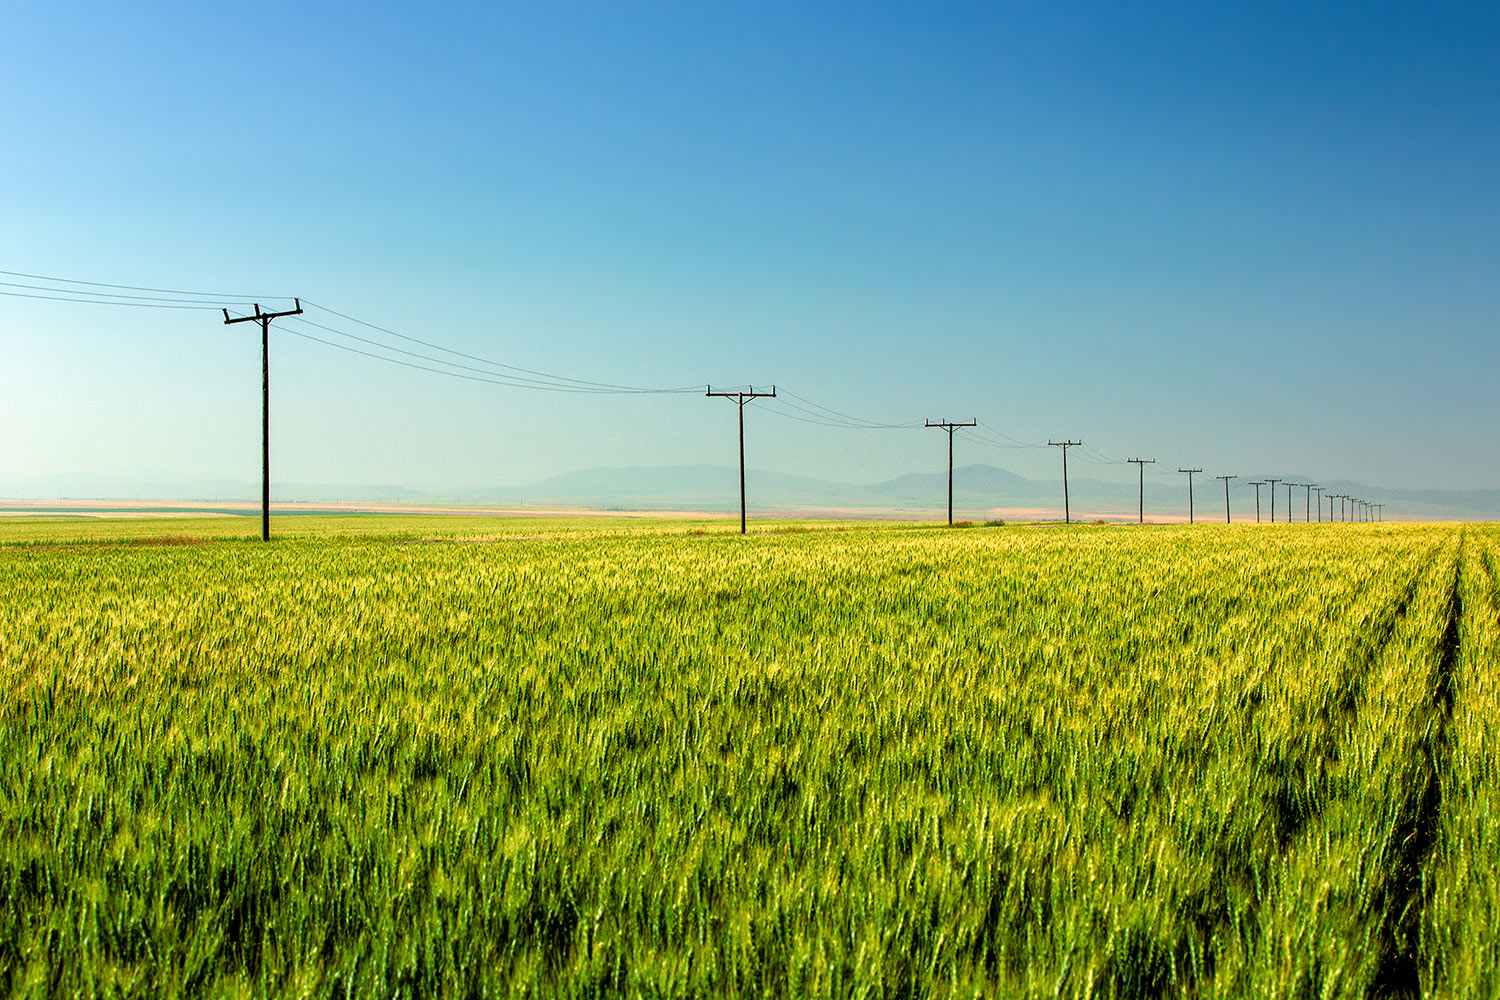 A row of electric utility poles line the edge of a large field of wheat northeast of Great Falls, Montana.&nbsp;→ Buy a Print